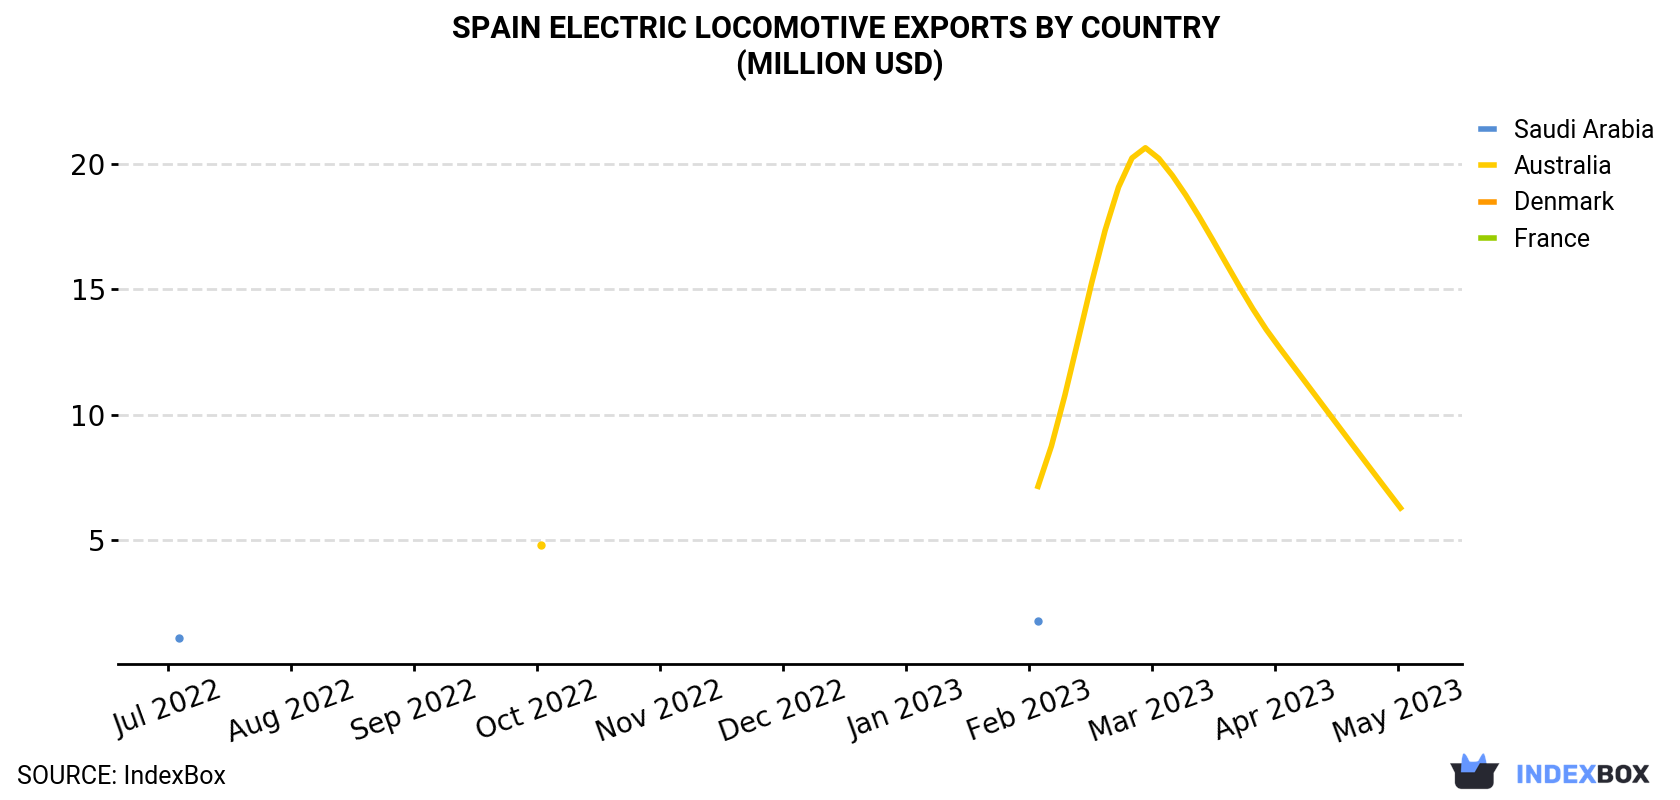 Spain Electric Locomotive Exports By Country (Million USD)